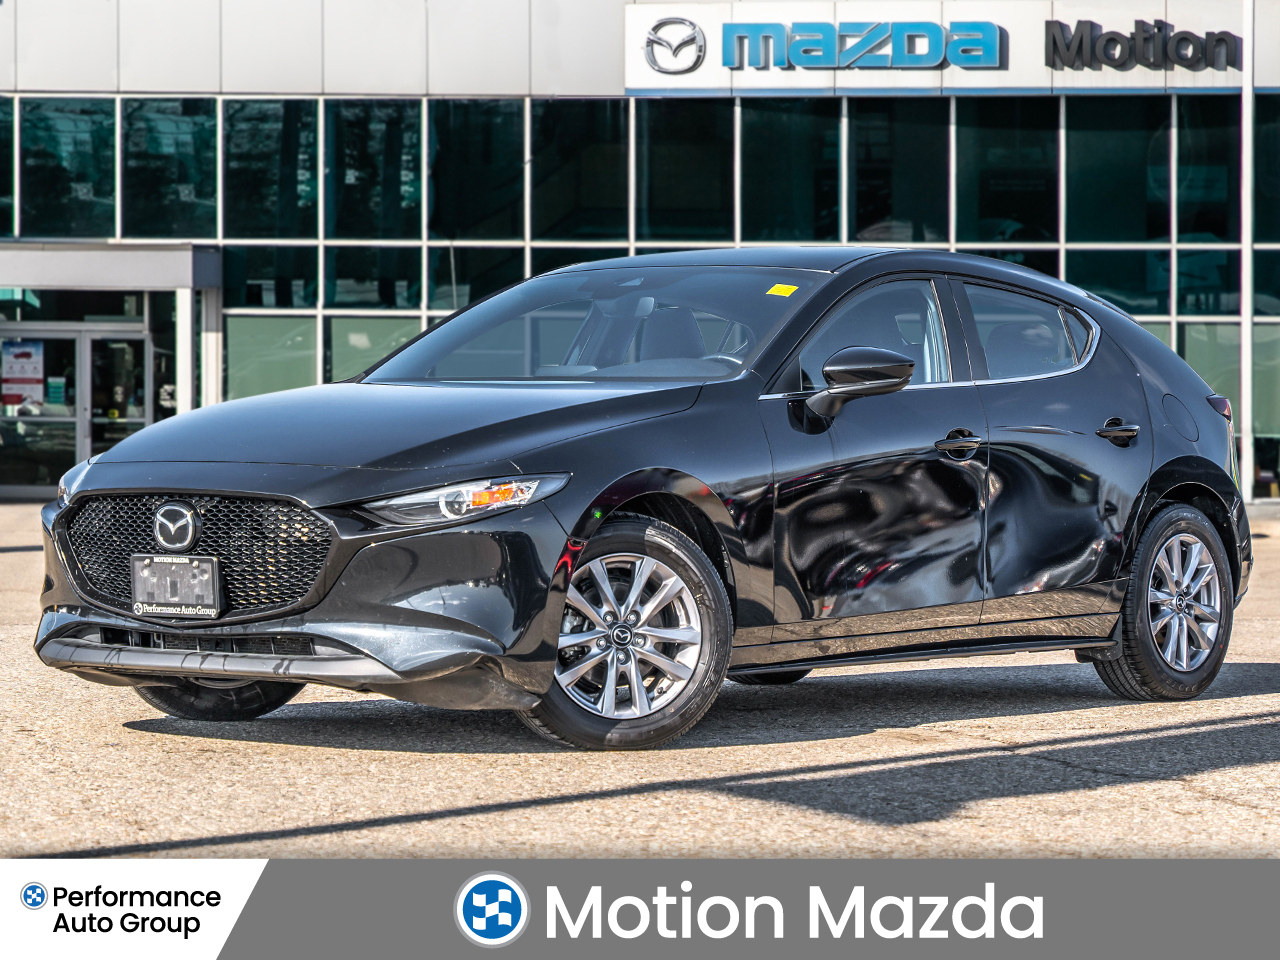 2021 Mazda Mazda3 GS *FWD *LEASE RETURN * LOW KM'S * ONE OWNER